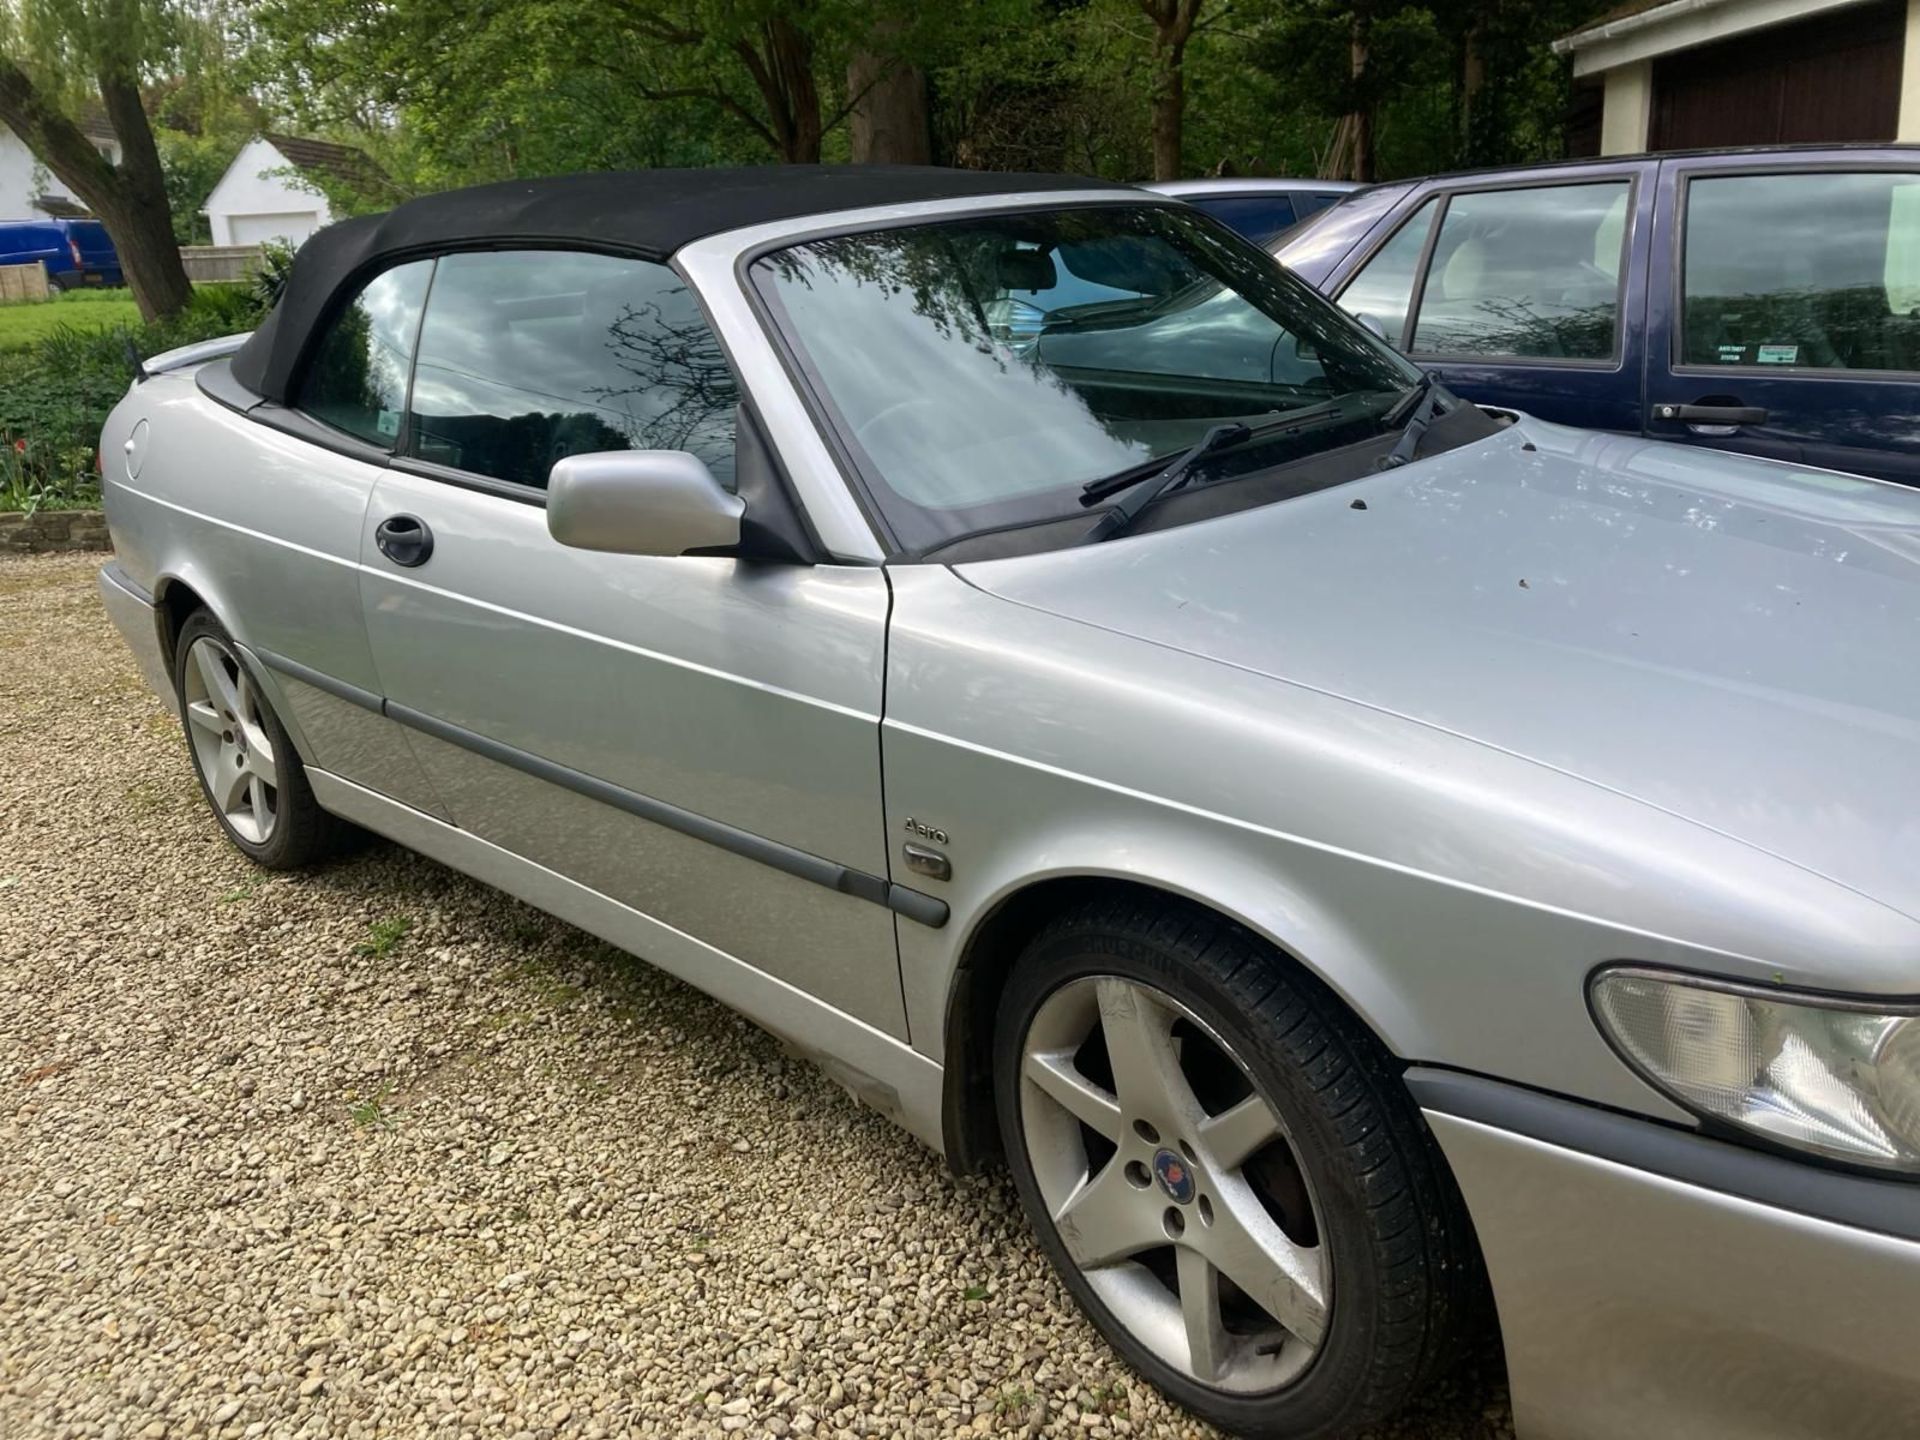 2002 Saab 9-3 Aero Convertible with 11 months MOT - Offered at No Reserve - Image 6 of 24